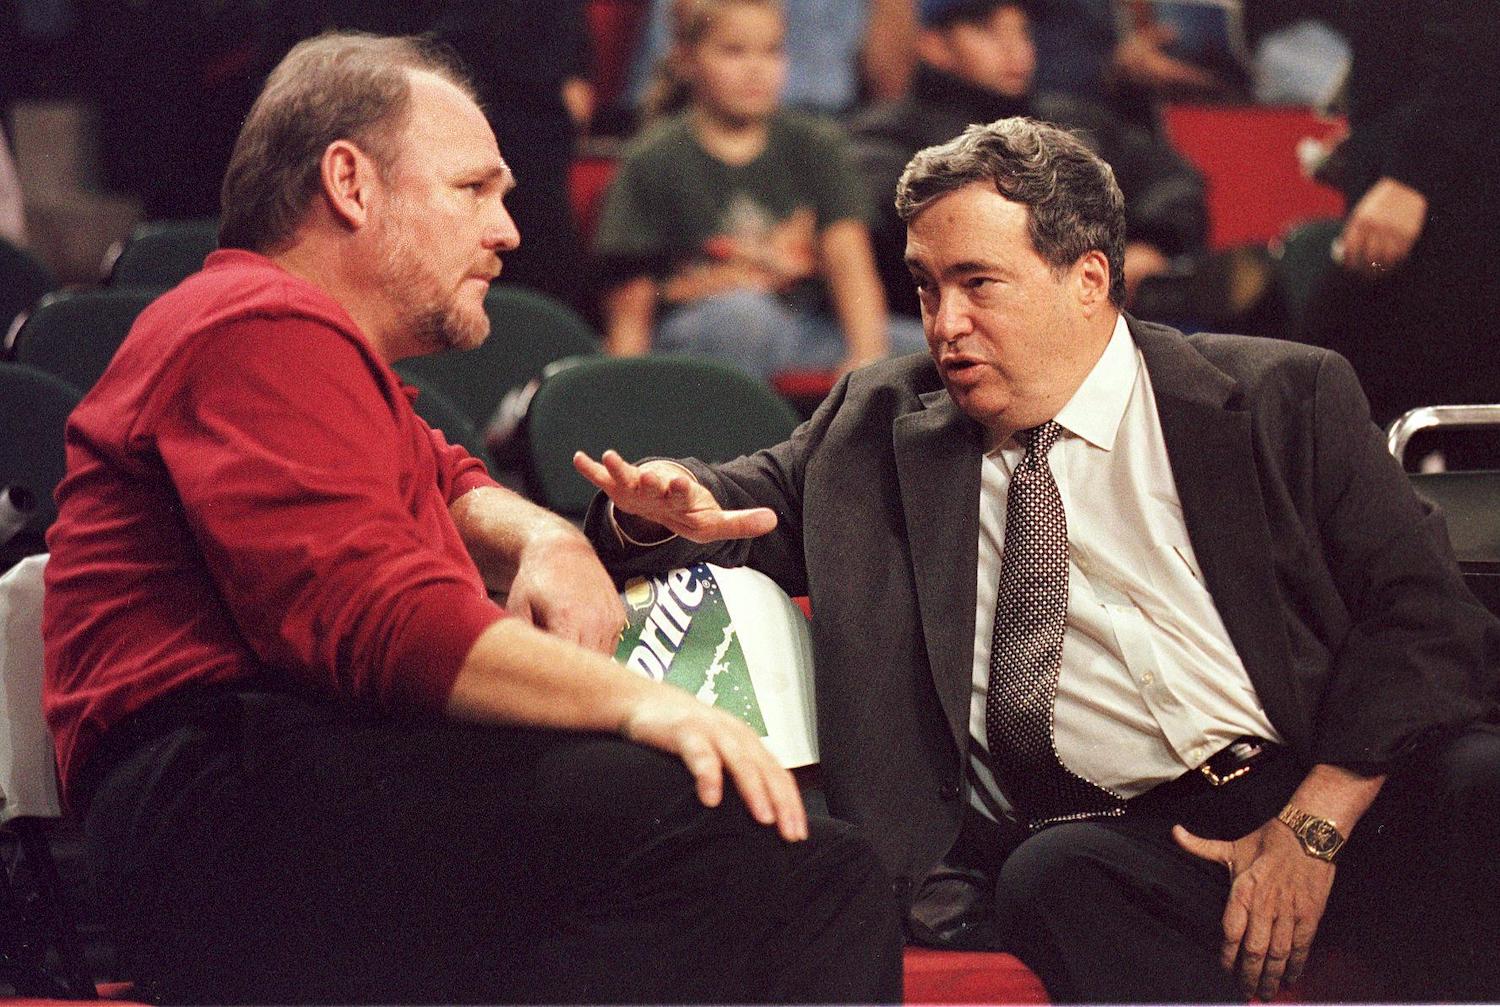 Chicago Bulls general manager Jerry Krause in conversation with then-Seattle Supersonics coach George Karl.